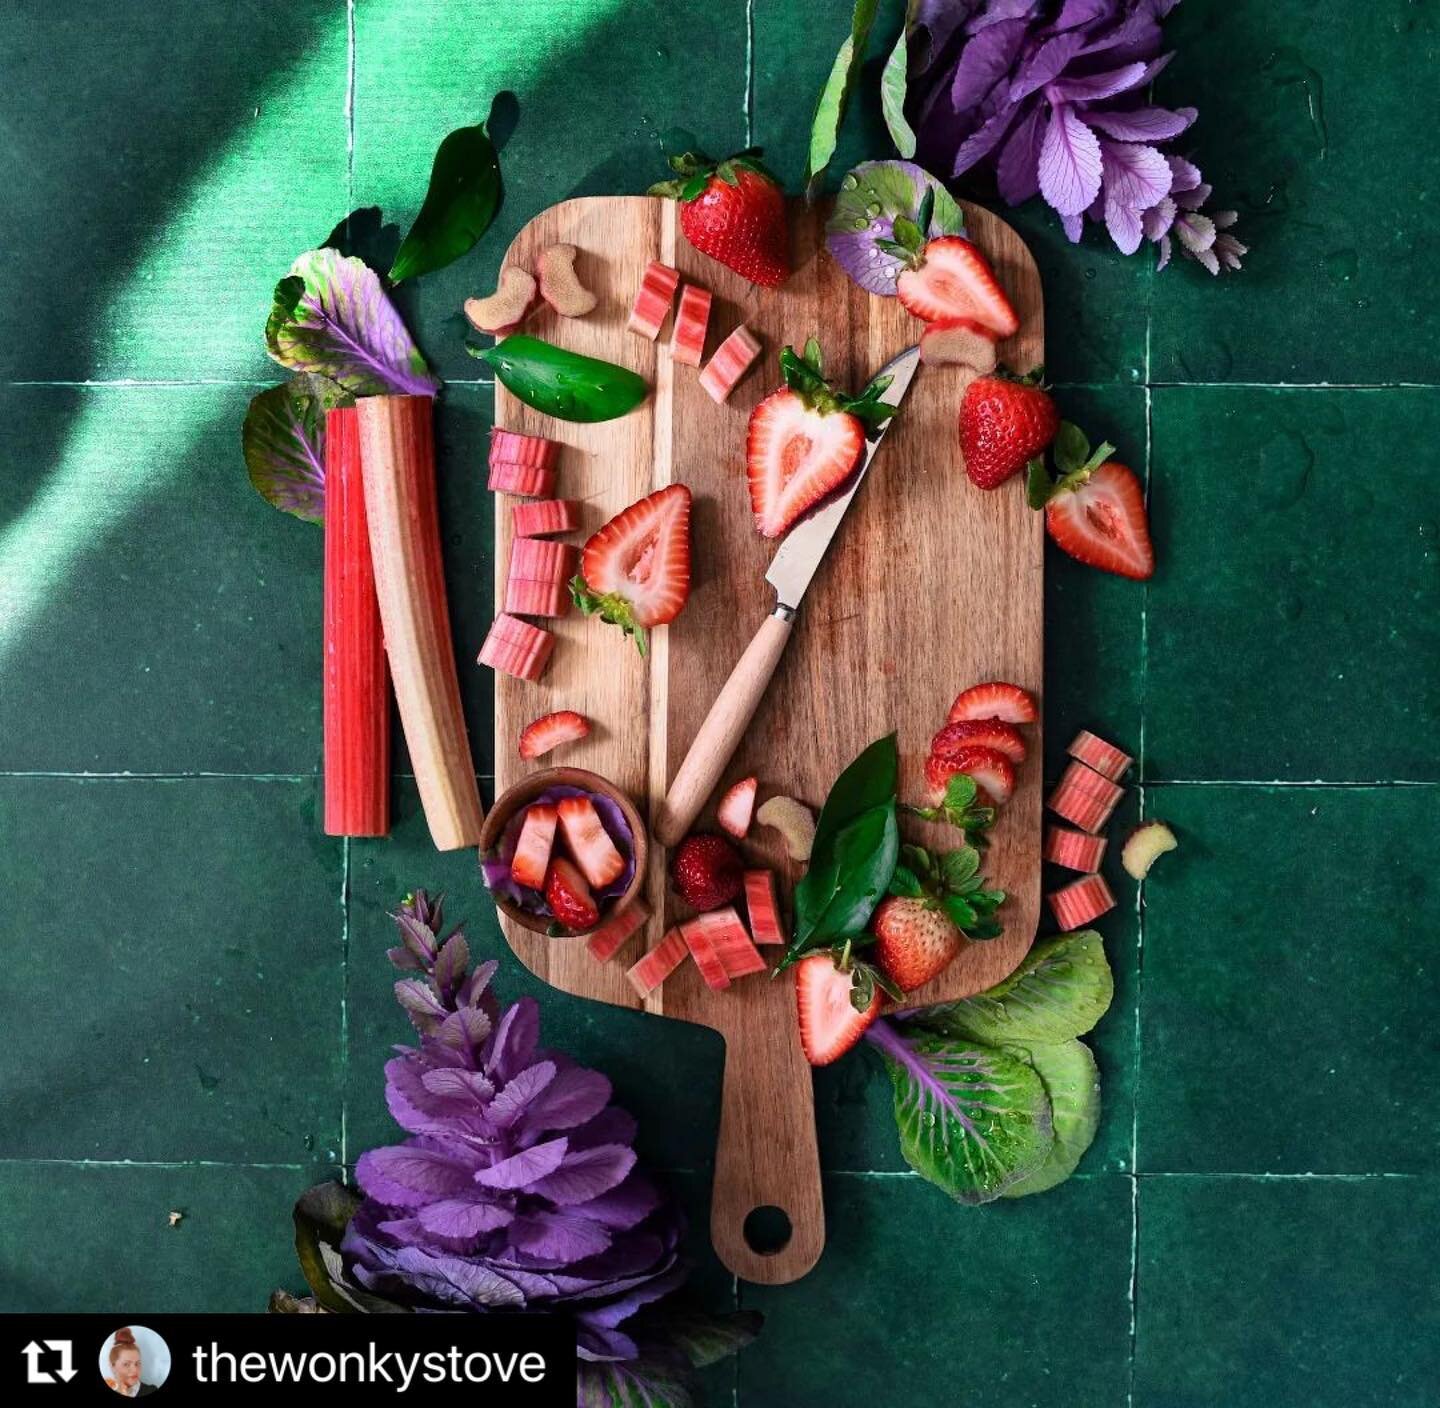 Green tiles and spring vibes thanks to Anisa @thewonkystove with an opportunity you shouldn&rsquo;t miss&hellip;

Read here ⬇️
#Repost @thewonkystove with @make_repost
・・・
Strawberry Rhubarb Danish
🌿
If you've signed up on TheWonkyStove.com this rec